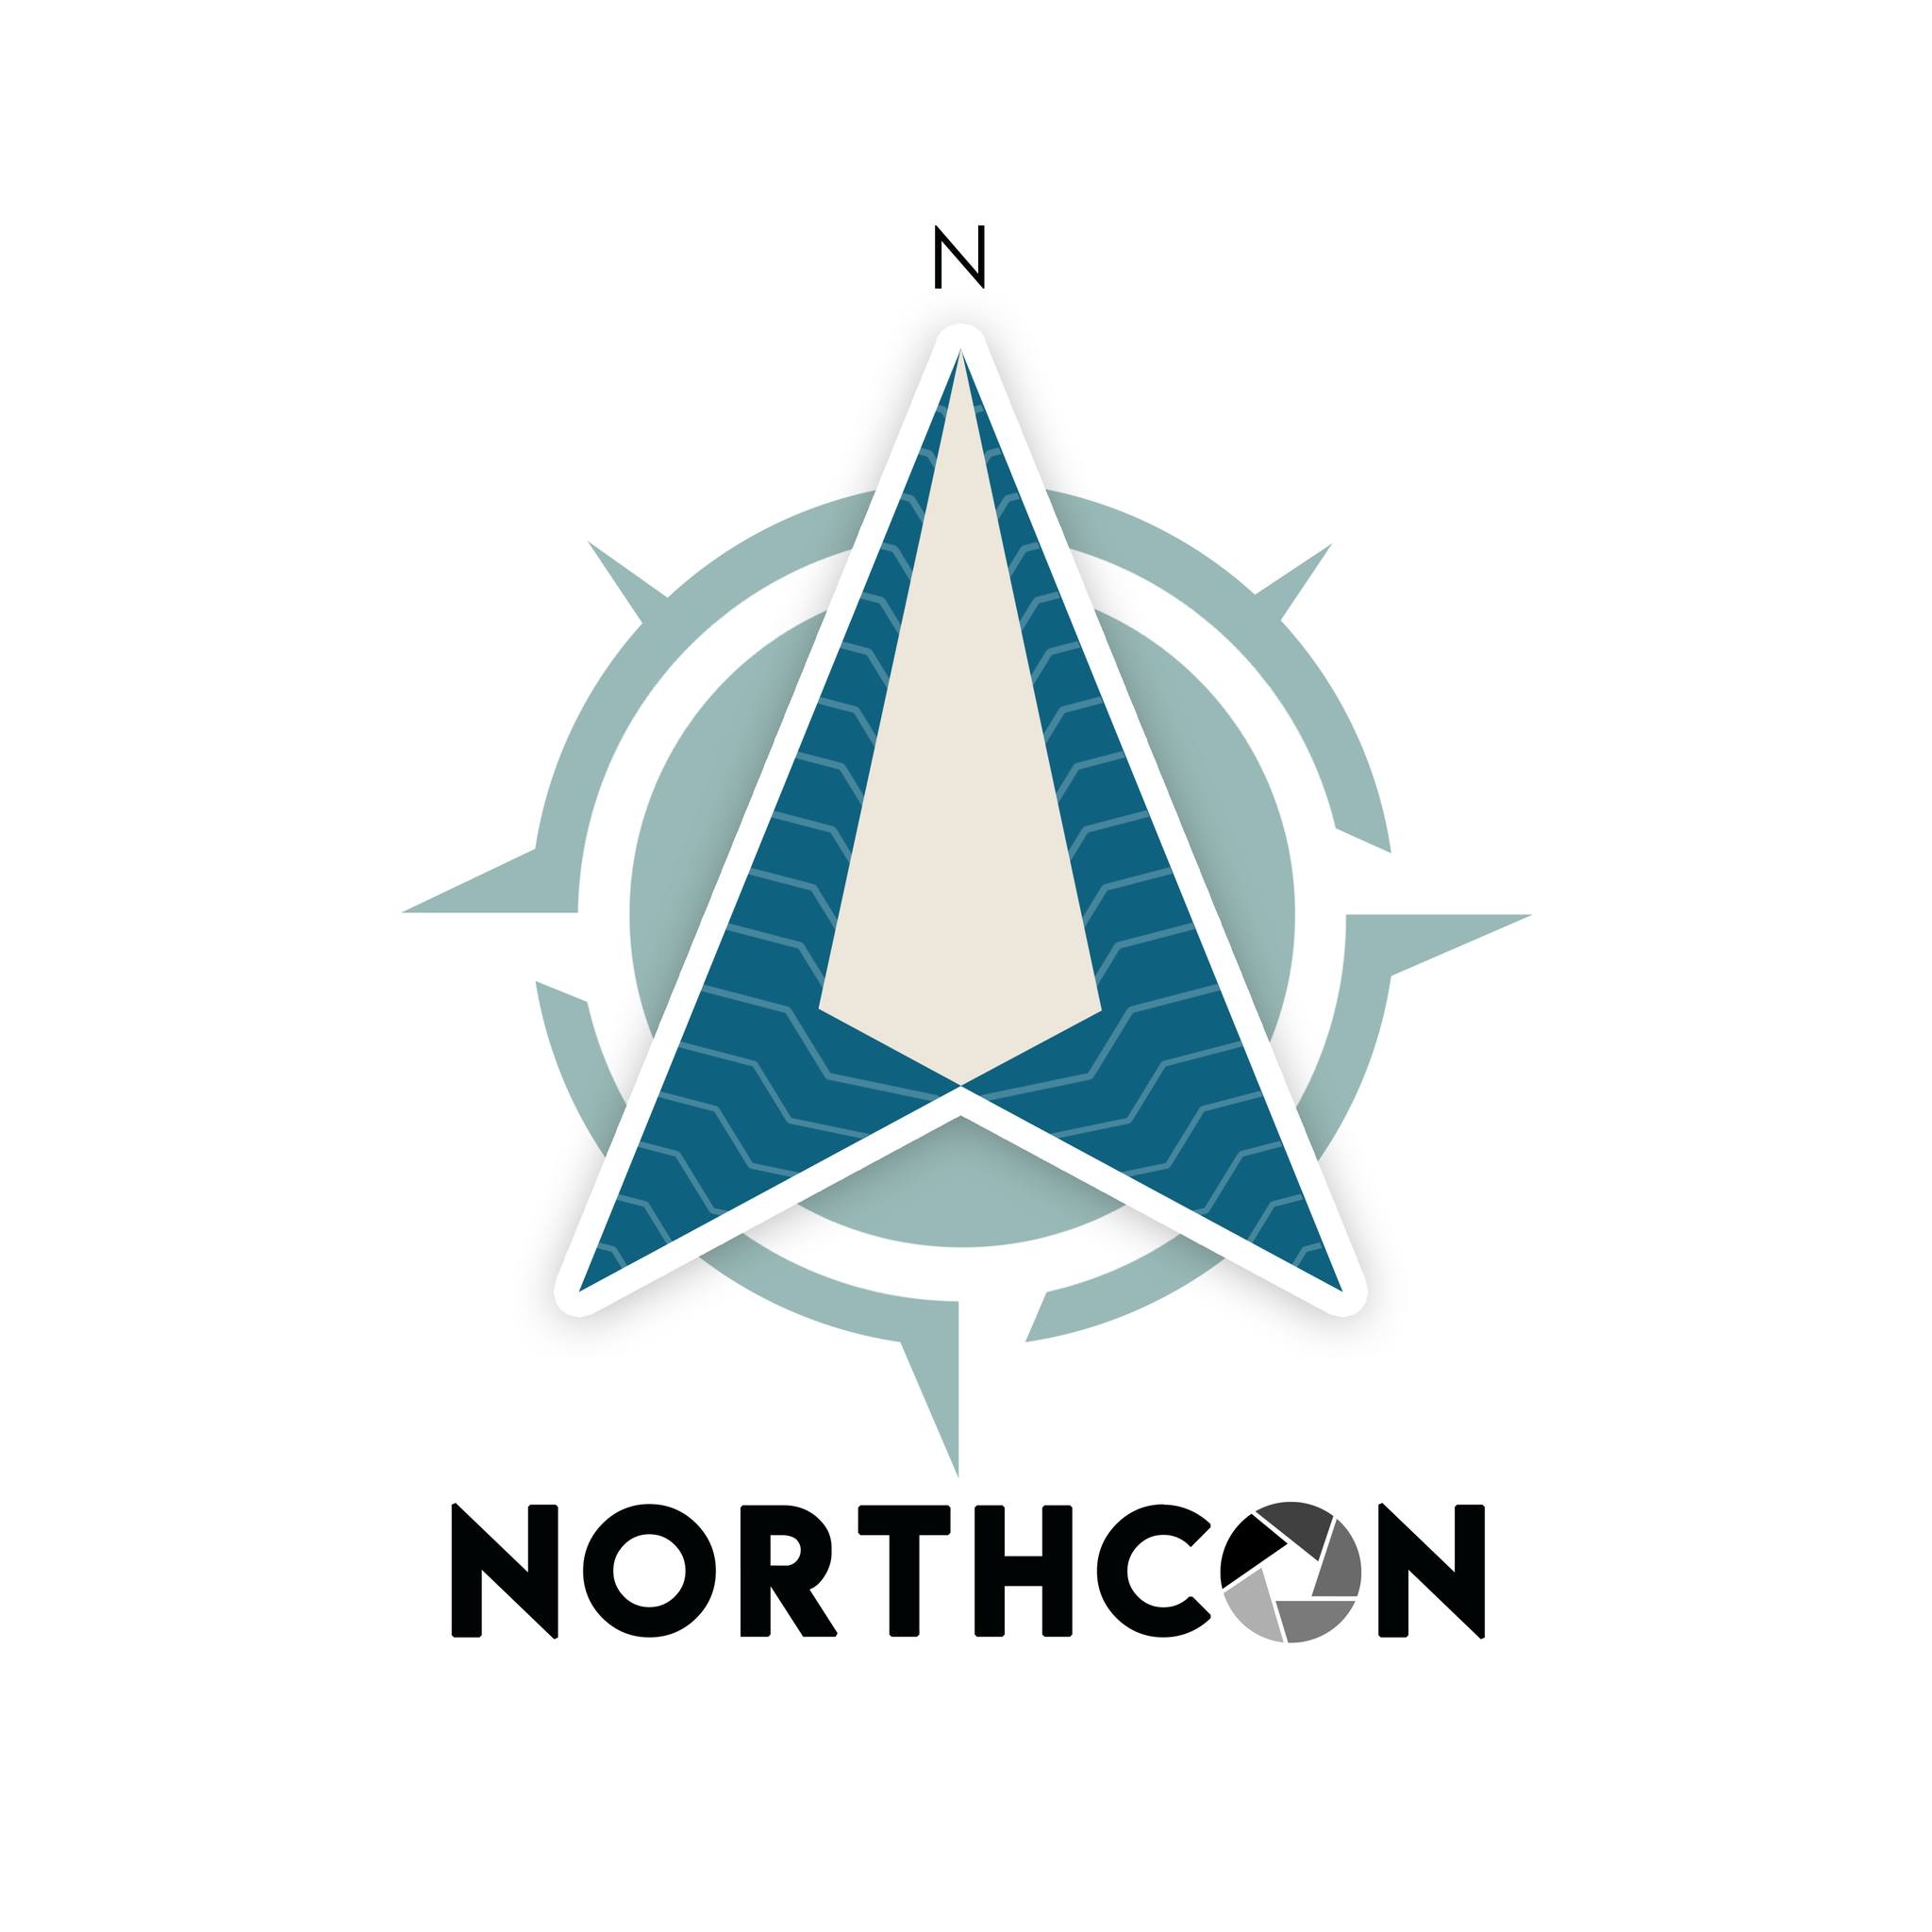 The Northern Connection